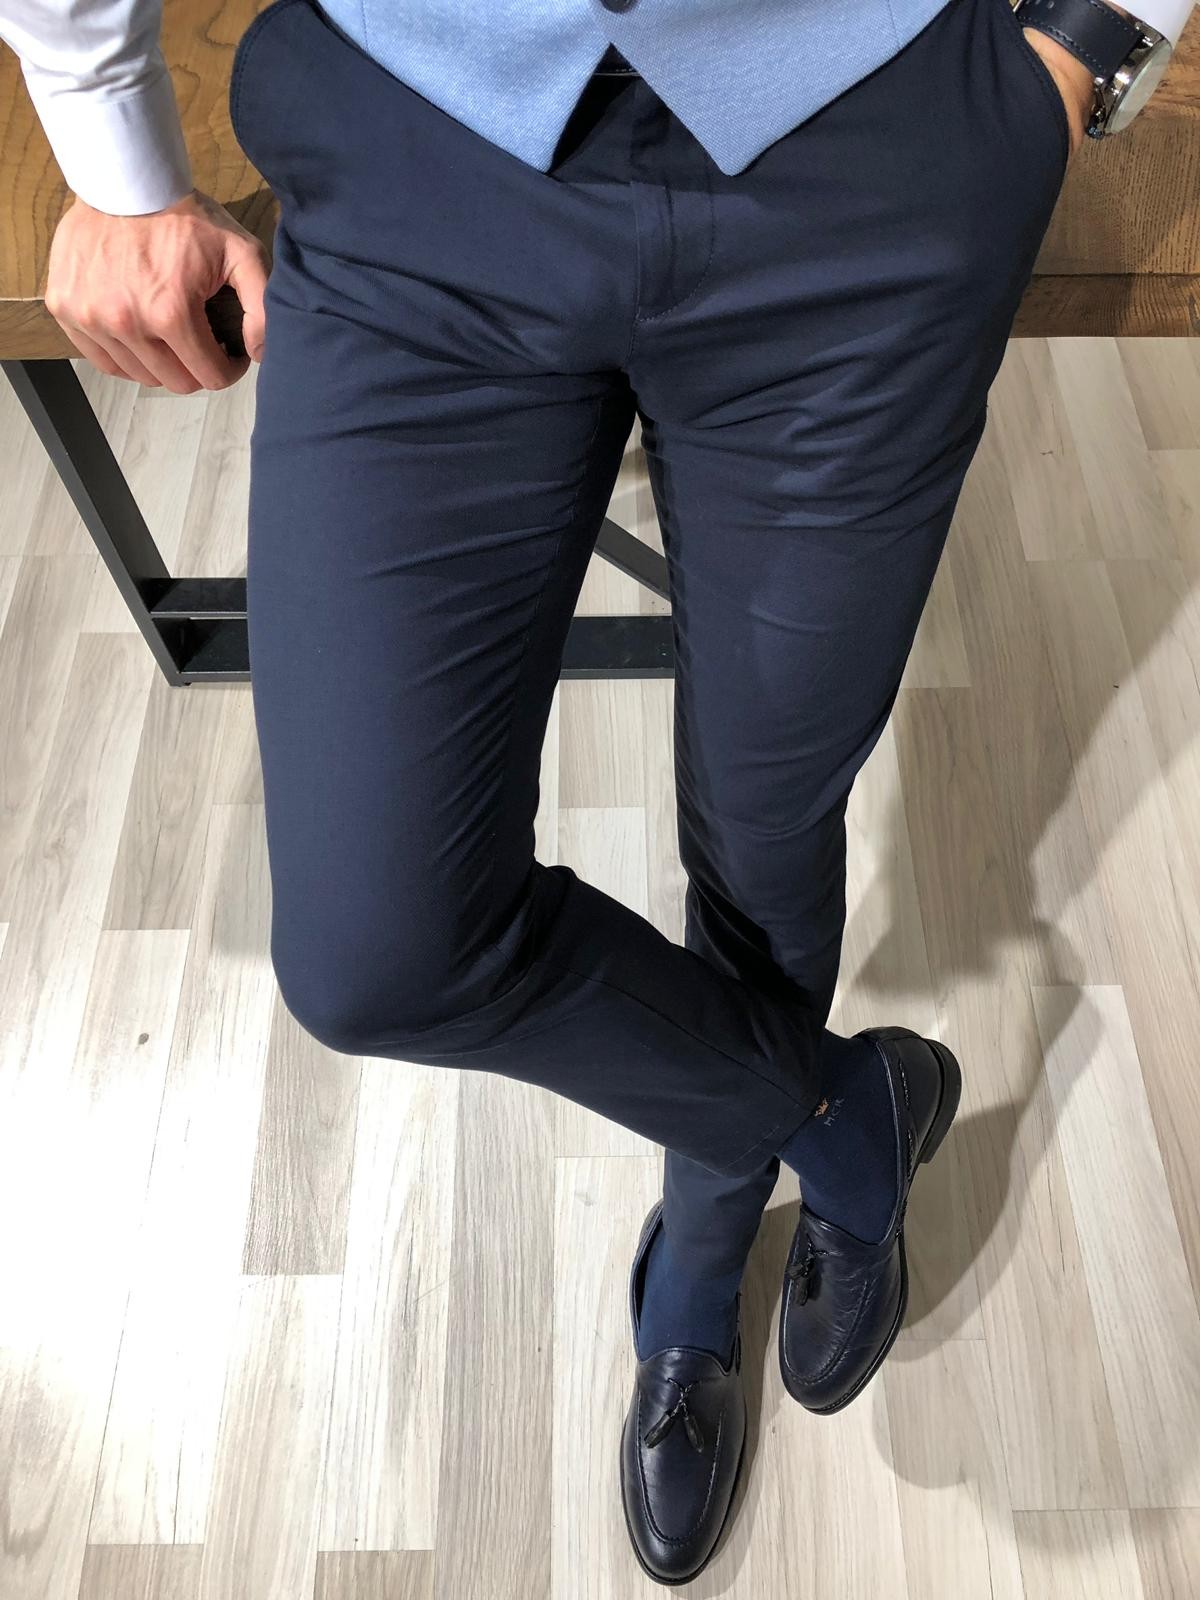 navy blue pants and black shoes